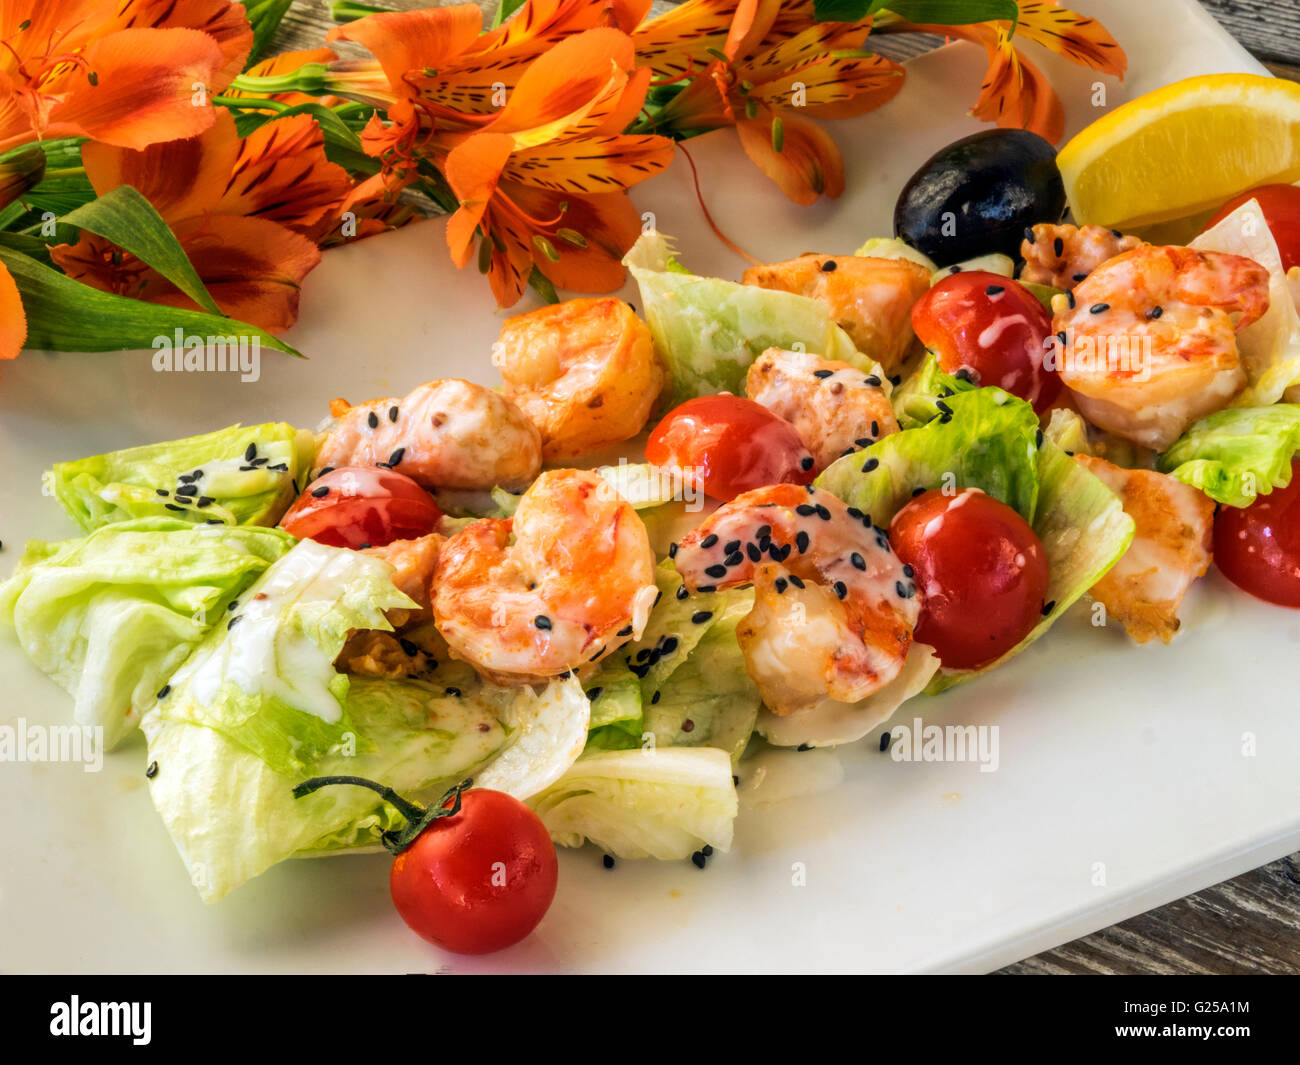 Grilled salmon and shrimp salad Stock Photo